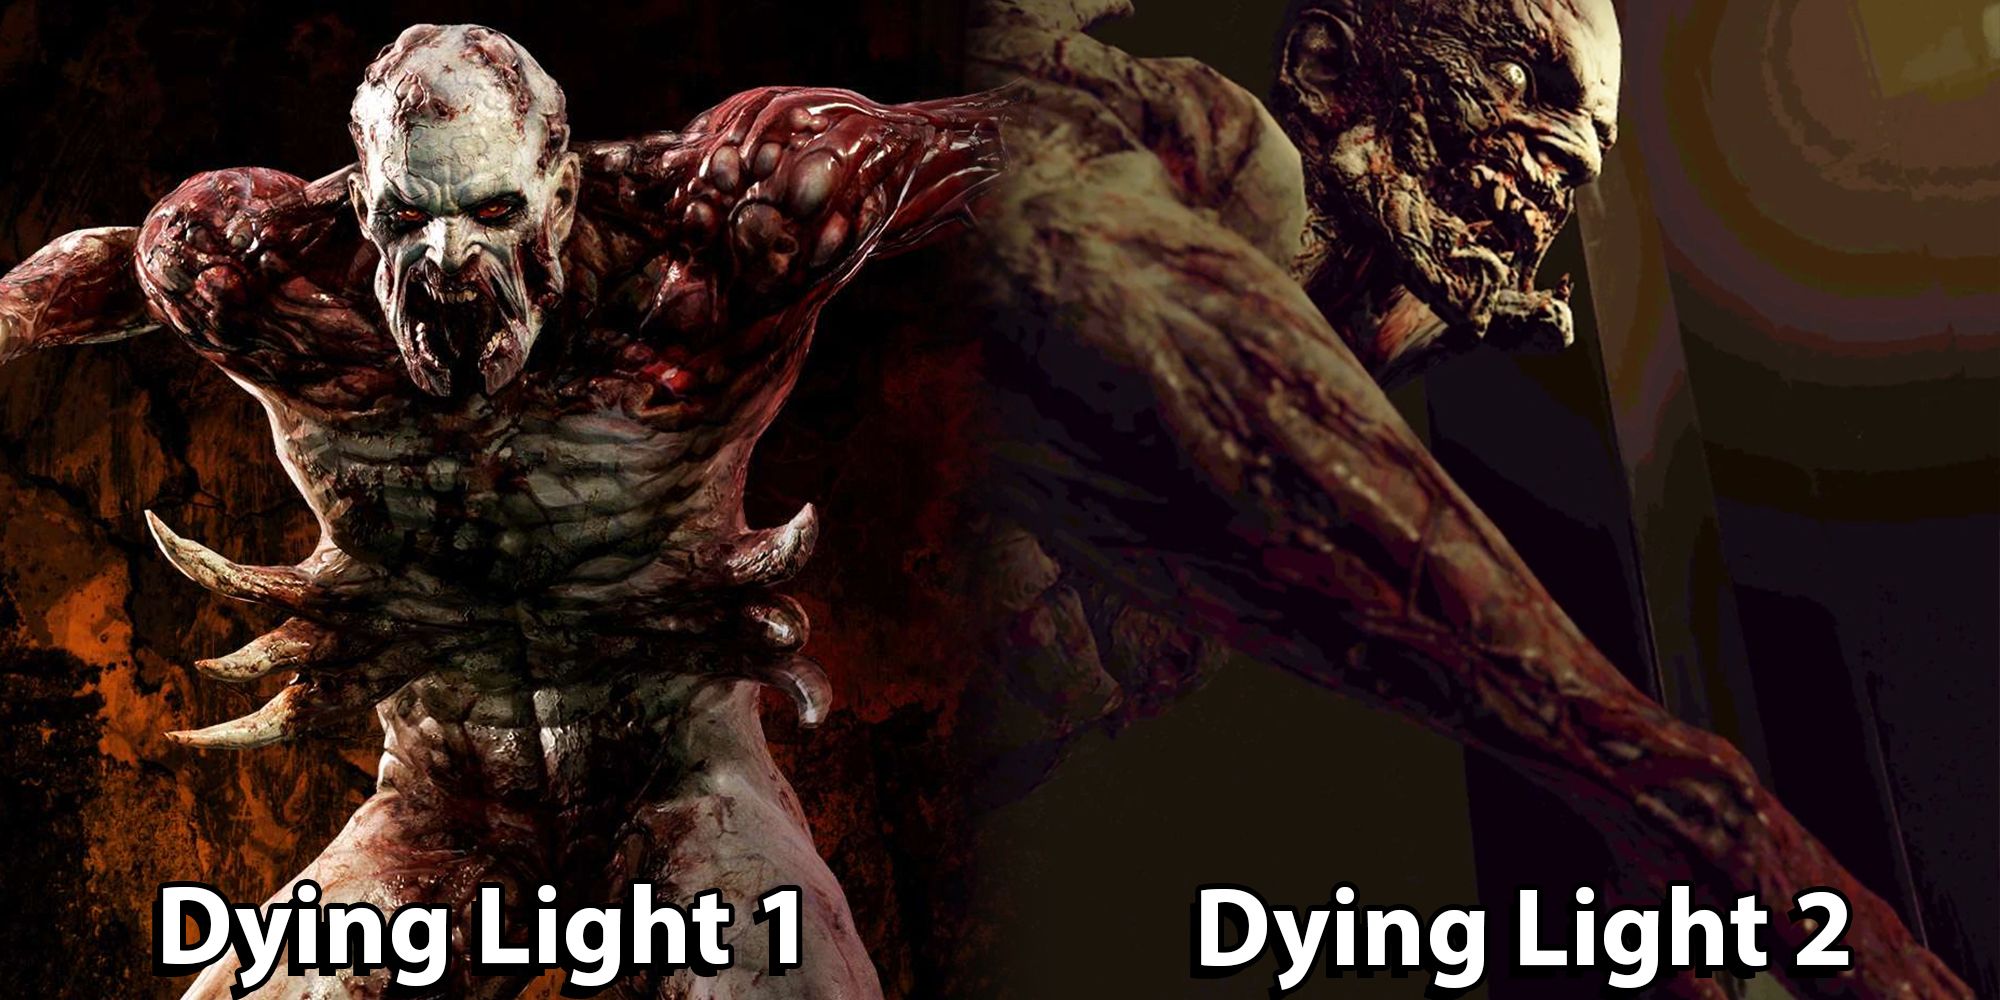 Dying Light 2 - Comparing The Way A Volatile Looks Between DL1 And DL2